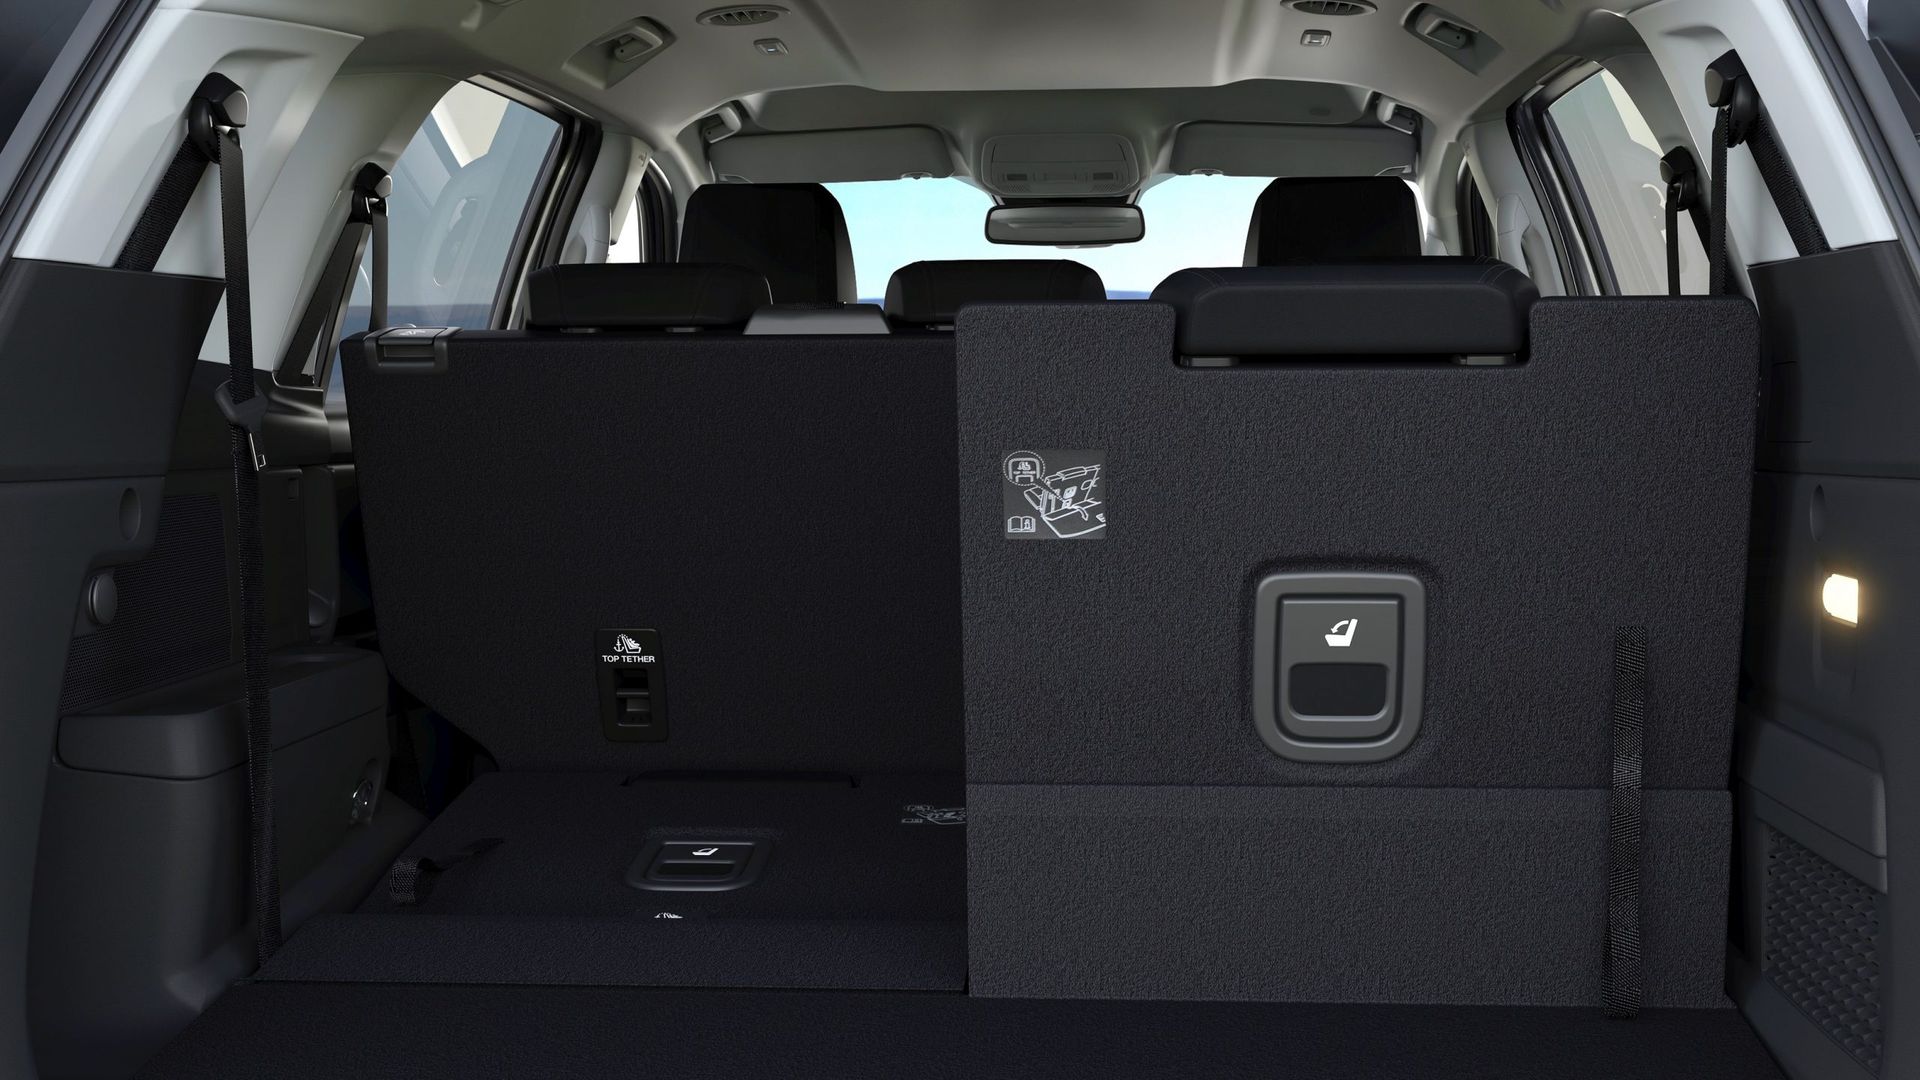 The trunk of the Ford Everest is known for its spaciousness, making it a top choice for car rental in Palawan, specifically in Puerto Princesa.